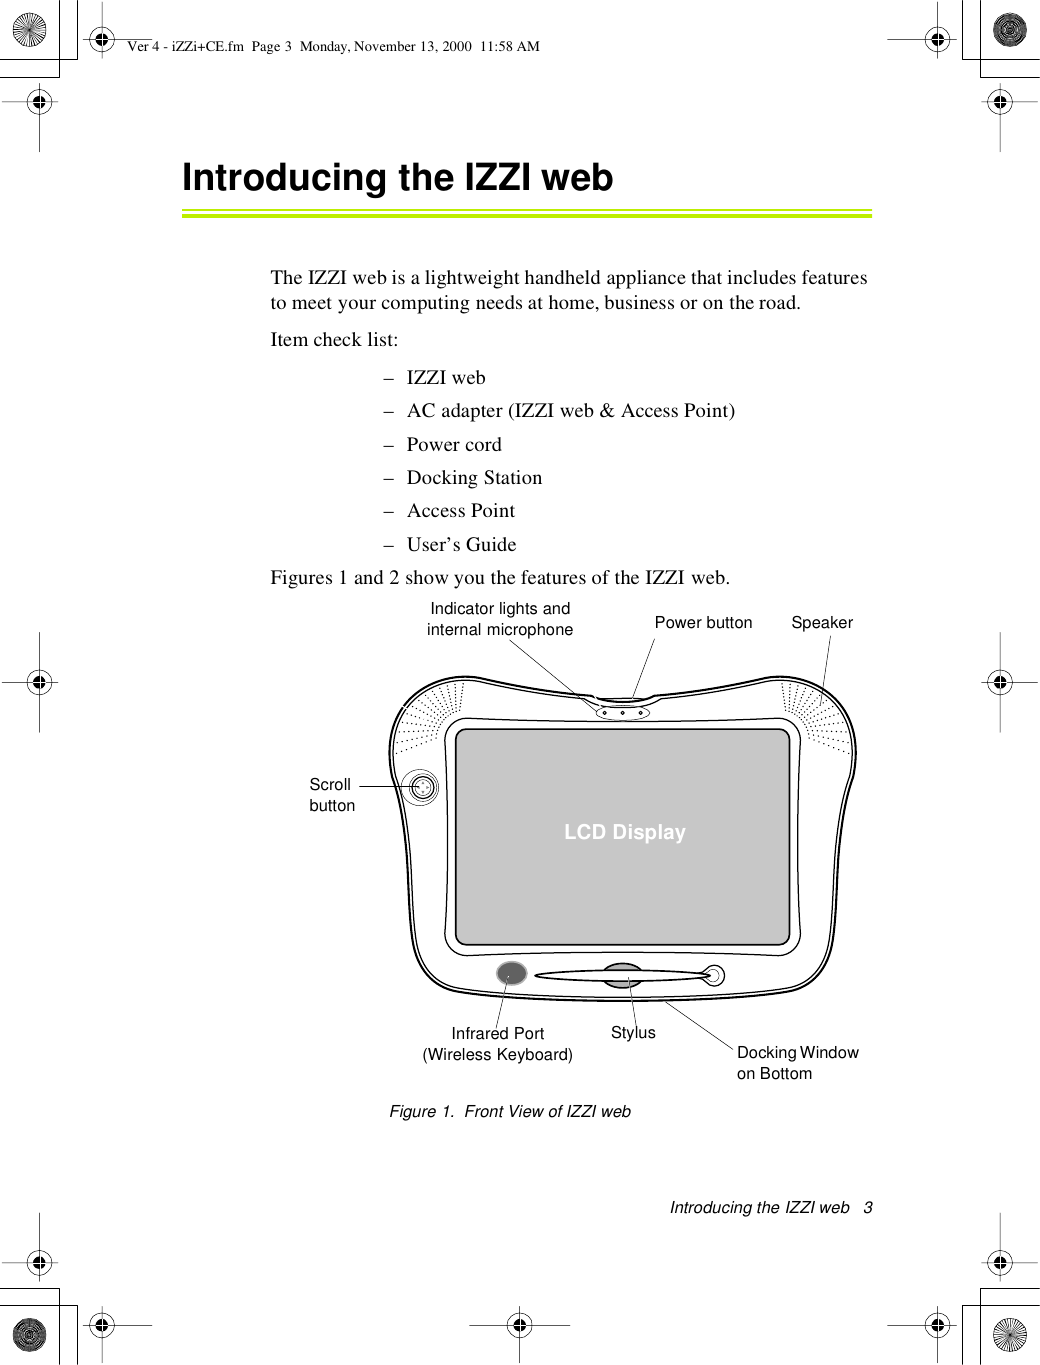 Introducing theIZZI web3Introducing the IZZI webThe IZZI web is a lightweight handheld appliance that includes featuresto meet your computing needs at home, business or on the road.Item check list:–IZZIweb– AC adapter (IZZI web &amp; Access Point)– Power cord– Docking Station– Access Point– User’s GuideFigures 1 and 2 show you the features of the IZZI web.Figure 1.Front ViewofIZZIwebPower buttonLCD DisplayStylusIndicator lights andinternal microphoneScrollbuttonSpeakerInfrared Port(Wireless Keyboard) Docking Windowon BottomVer 4 - iZZi+CE.fm Page 3 Monday, November 13, 2000 11:58 AM